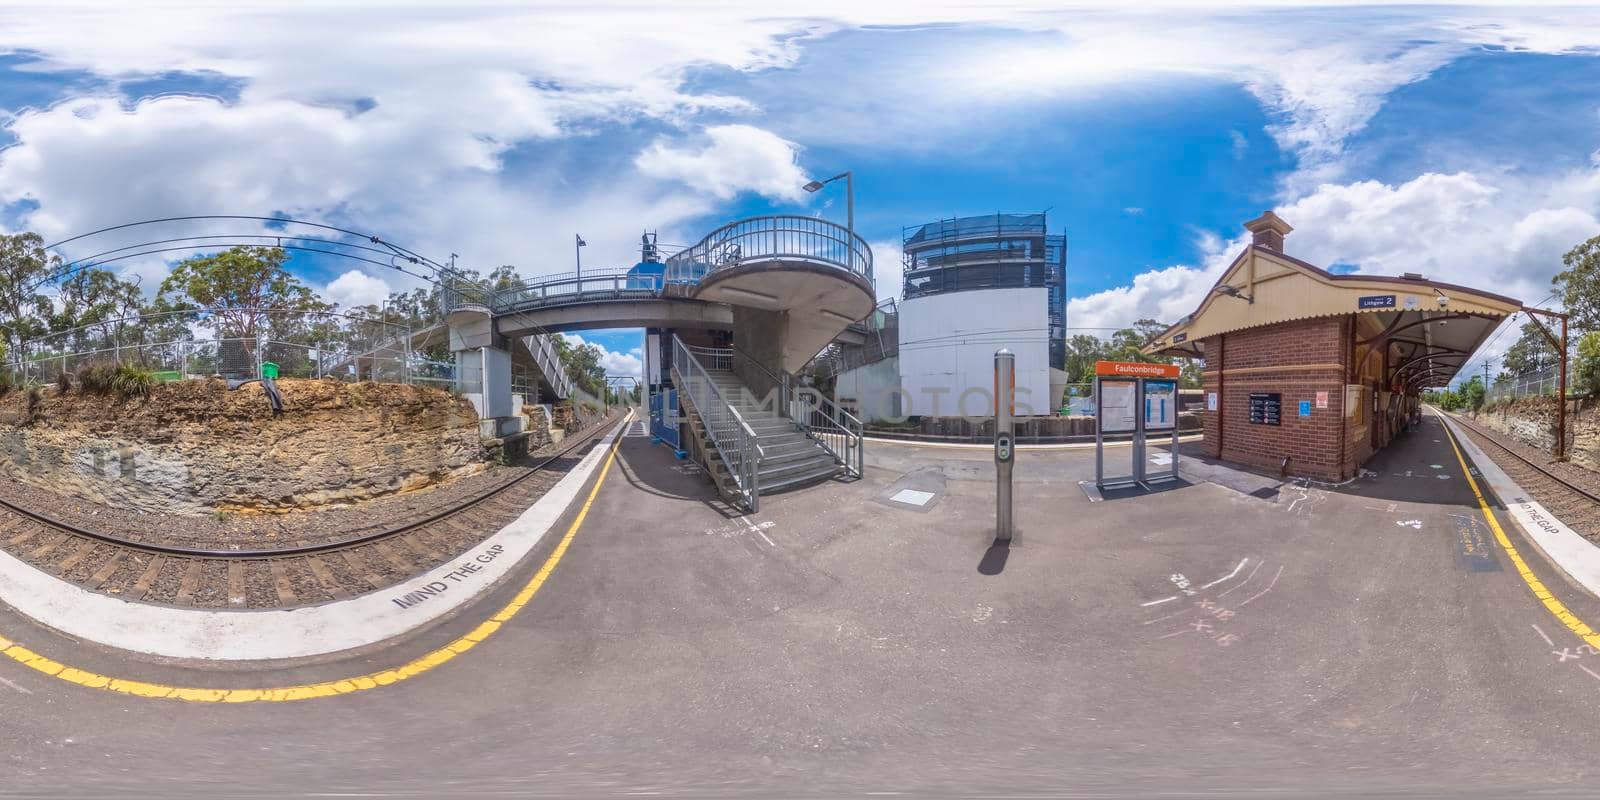 Spherical 360-degree panorama photograph of Faulconbridge Train Station by WittkePhotos